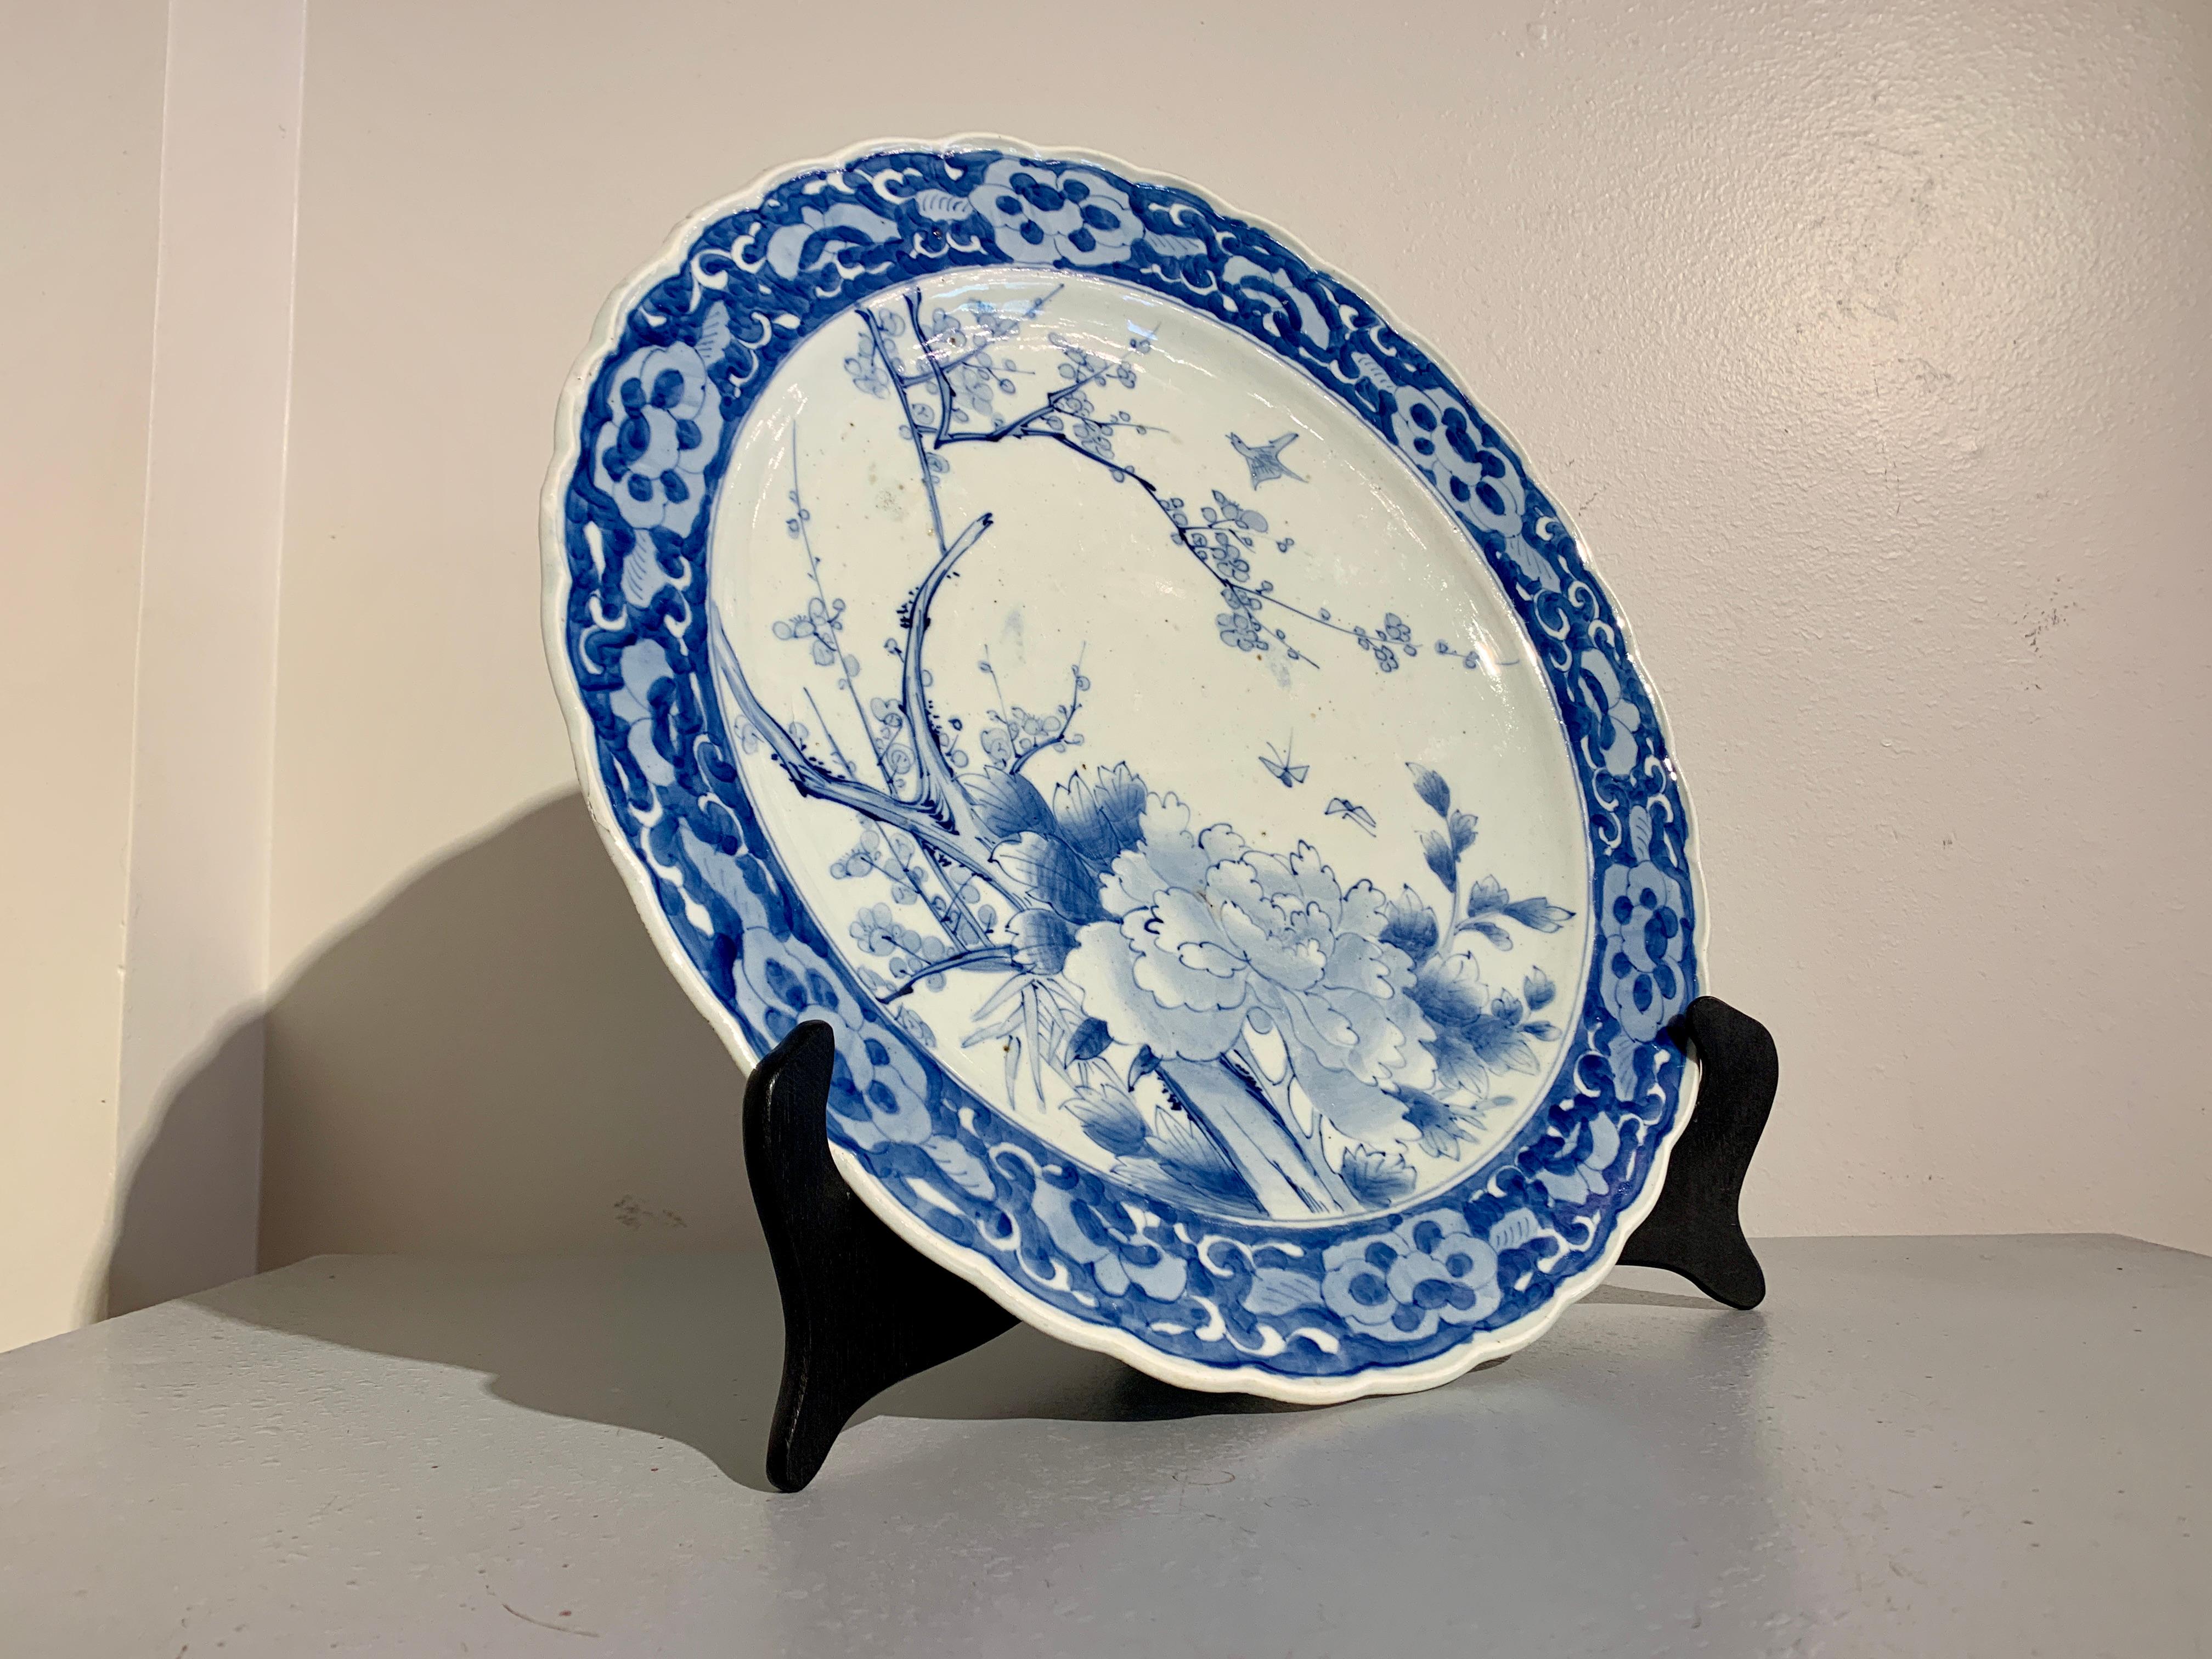 A fine and large antique Japanese porcelain blue and white decorated Arita ware charger with scalloped rim, Meiji Period, mid to late 19th century, Japan.

The large charger features a large peony blossom with flowering cherry in the background. A